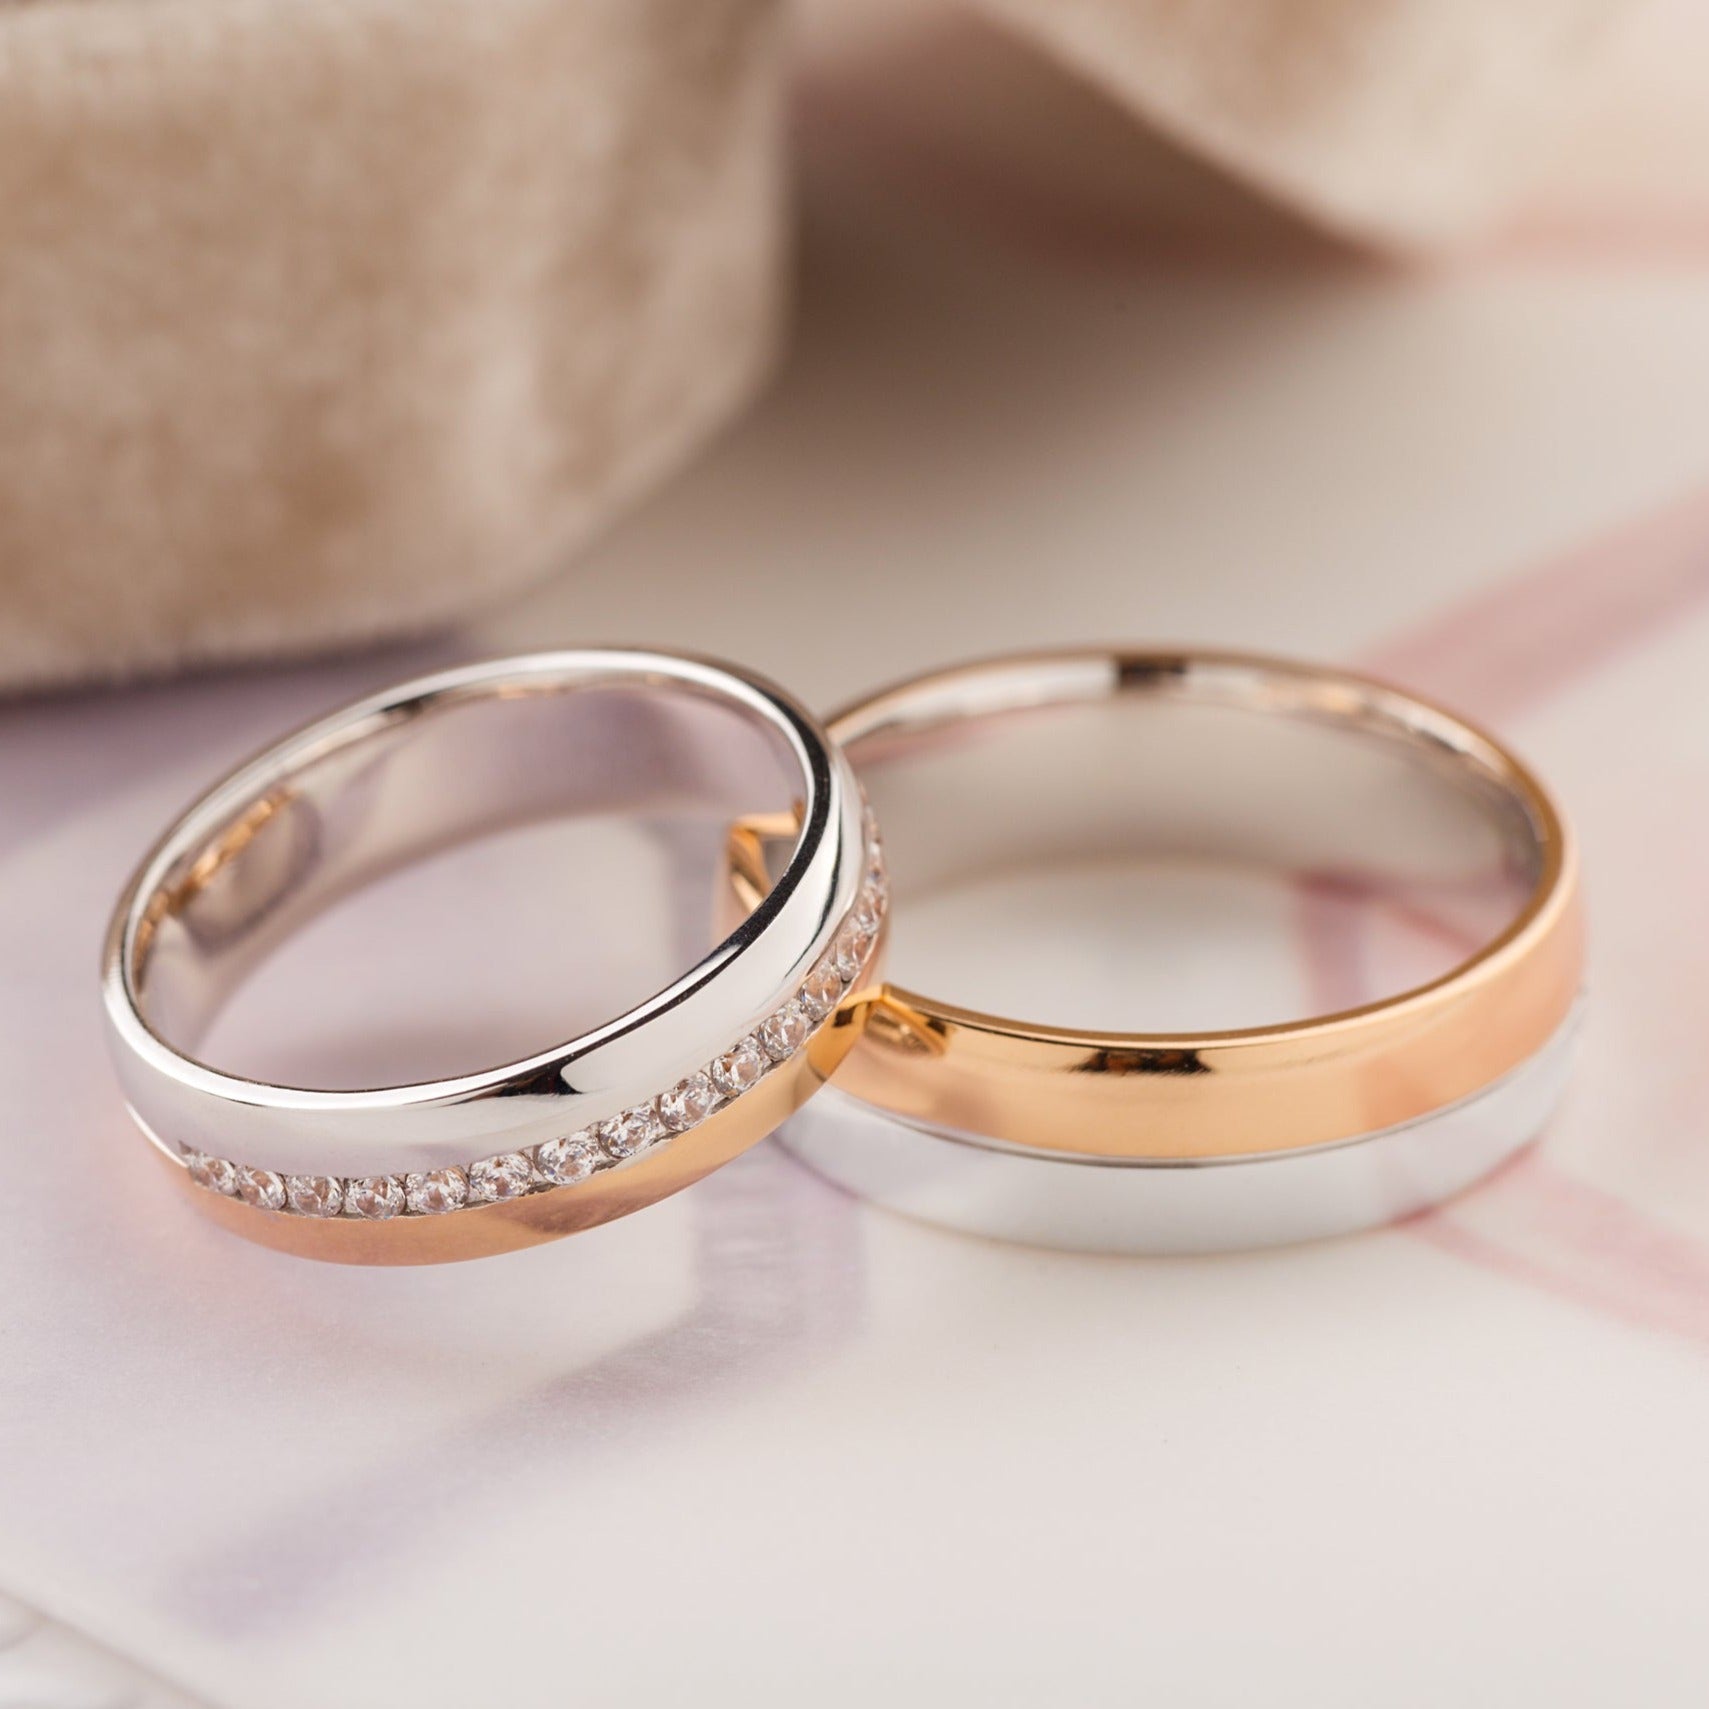 Gold wedding bands with diamonds. Two tone wedding bands. His and hers wedding rings set. Matching wedding bands. Gold wedding rings with diamonds 